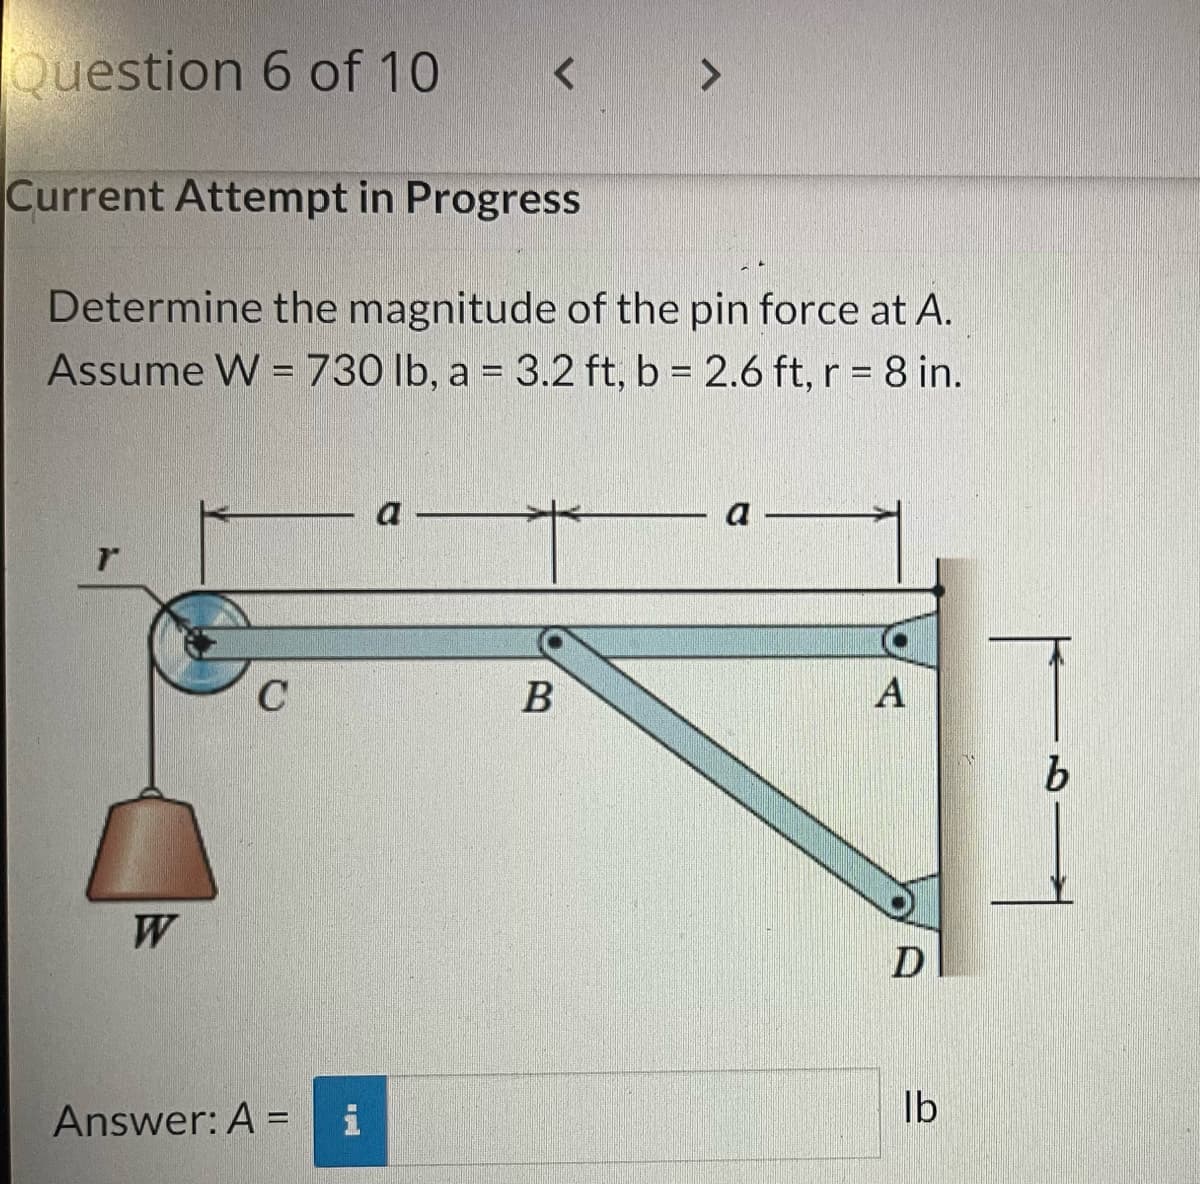 Question 6 of 10
Current Attempt in Progress
r
Determine the magnitude of the pin force at A.
Assume W = 730 lb, a = 3.2 ft, b = 2.6 ft, r = 8 in.
W
C
Answer: A =
<
i
a
>
B
a
A
D
lb
b